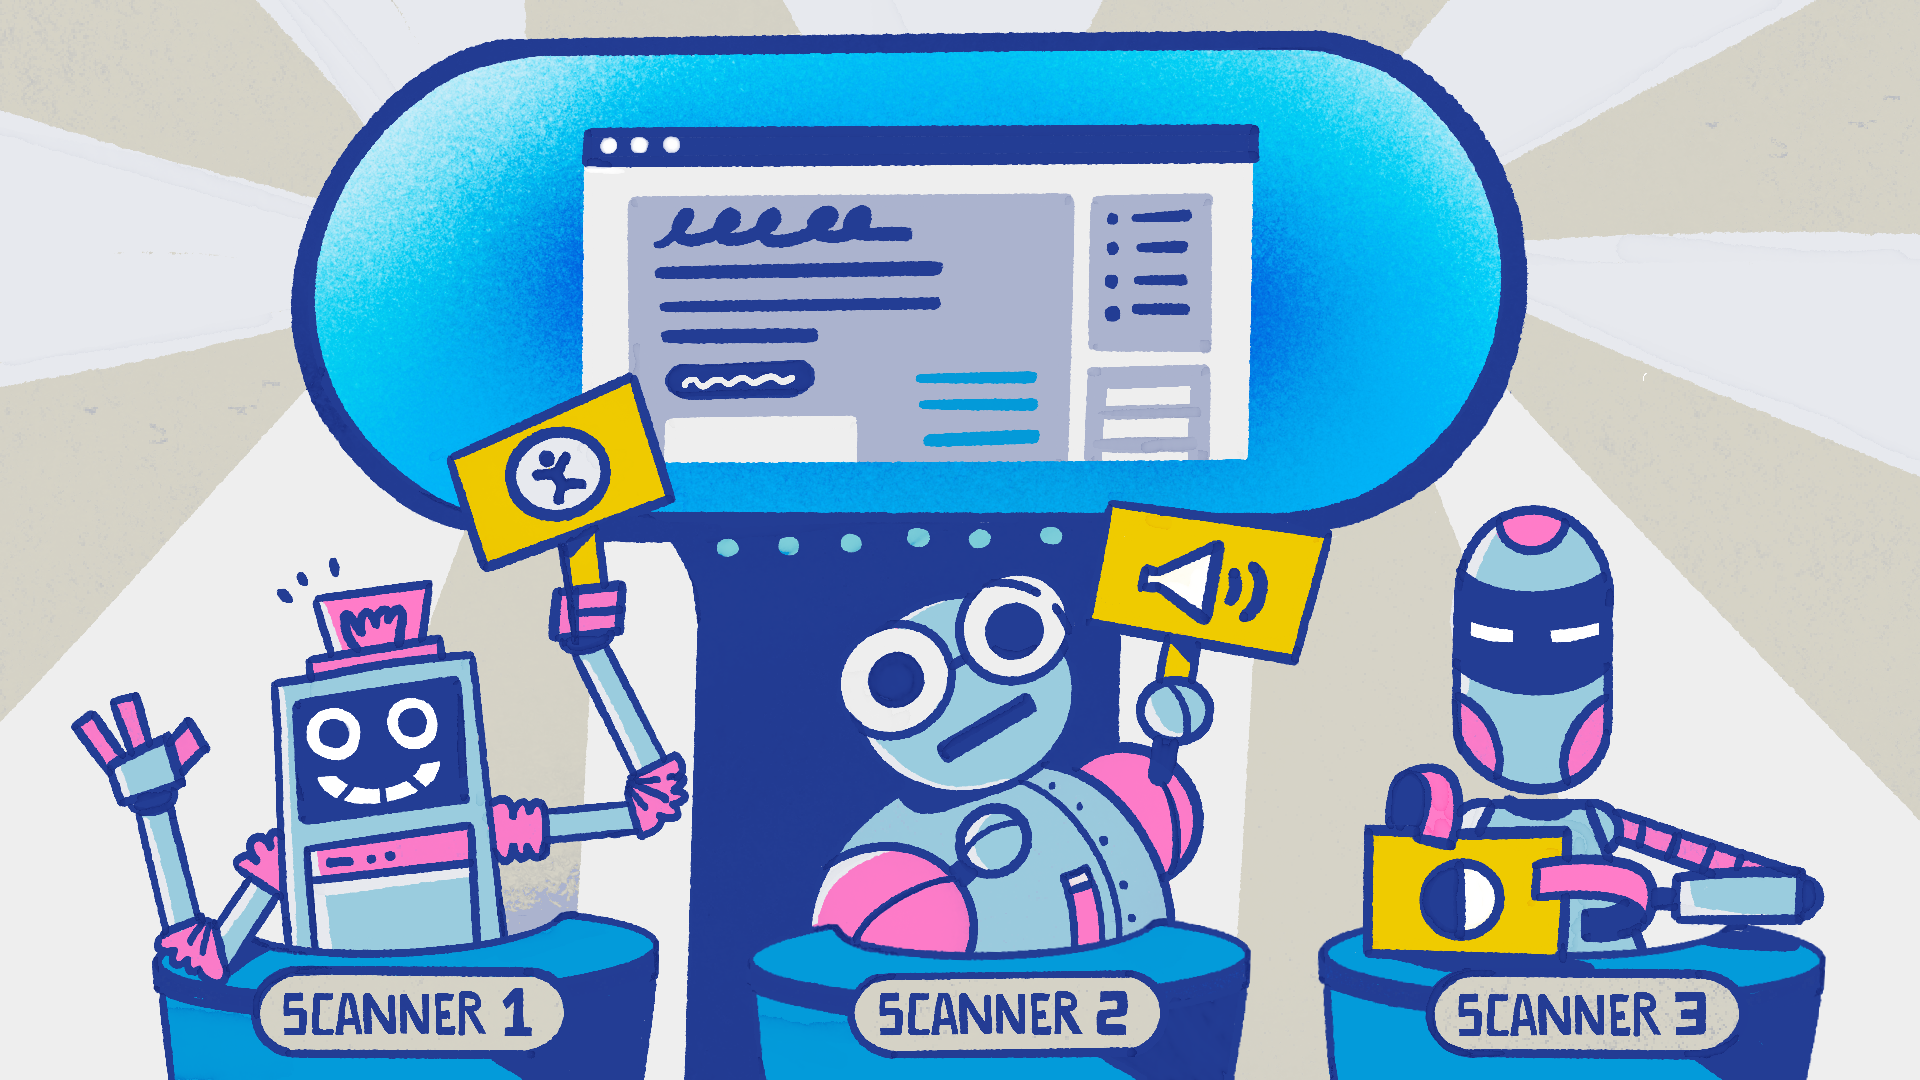 Illustration of three whimsical robots who are quiz TV show contestants and in front of a large monitor showing a website. Each is labeled Scanner 1, Scanner 2, and Scanner 3 and holds a sign with a symbol of accessibility, sound, and color contrast.